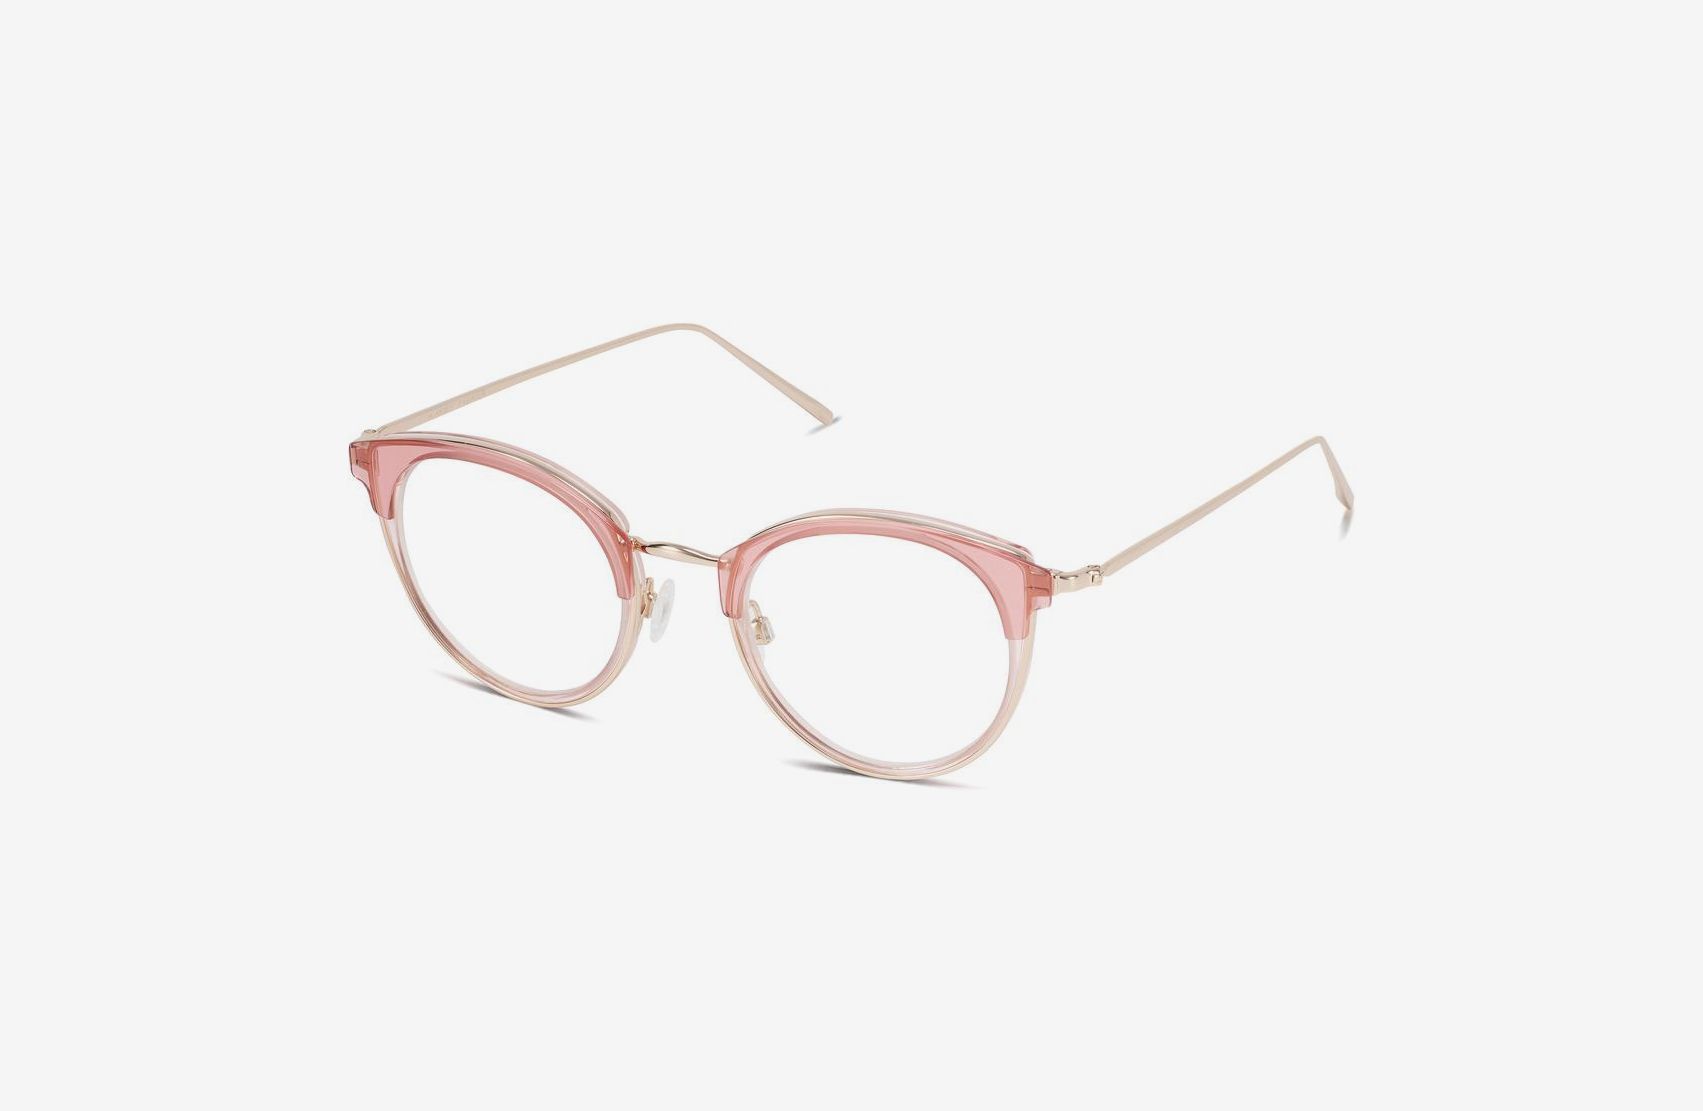 Cute Glasses Frames For Oval Faces | tunersread.com